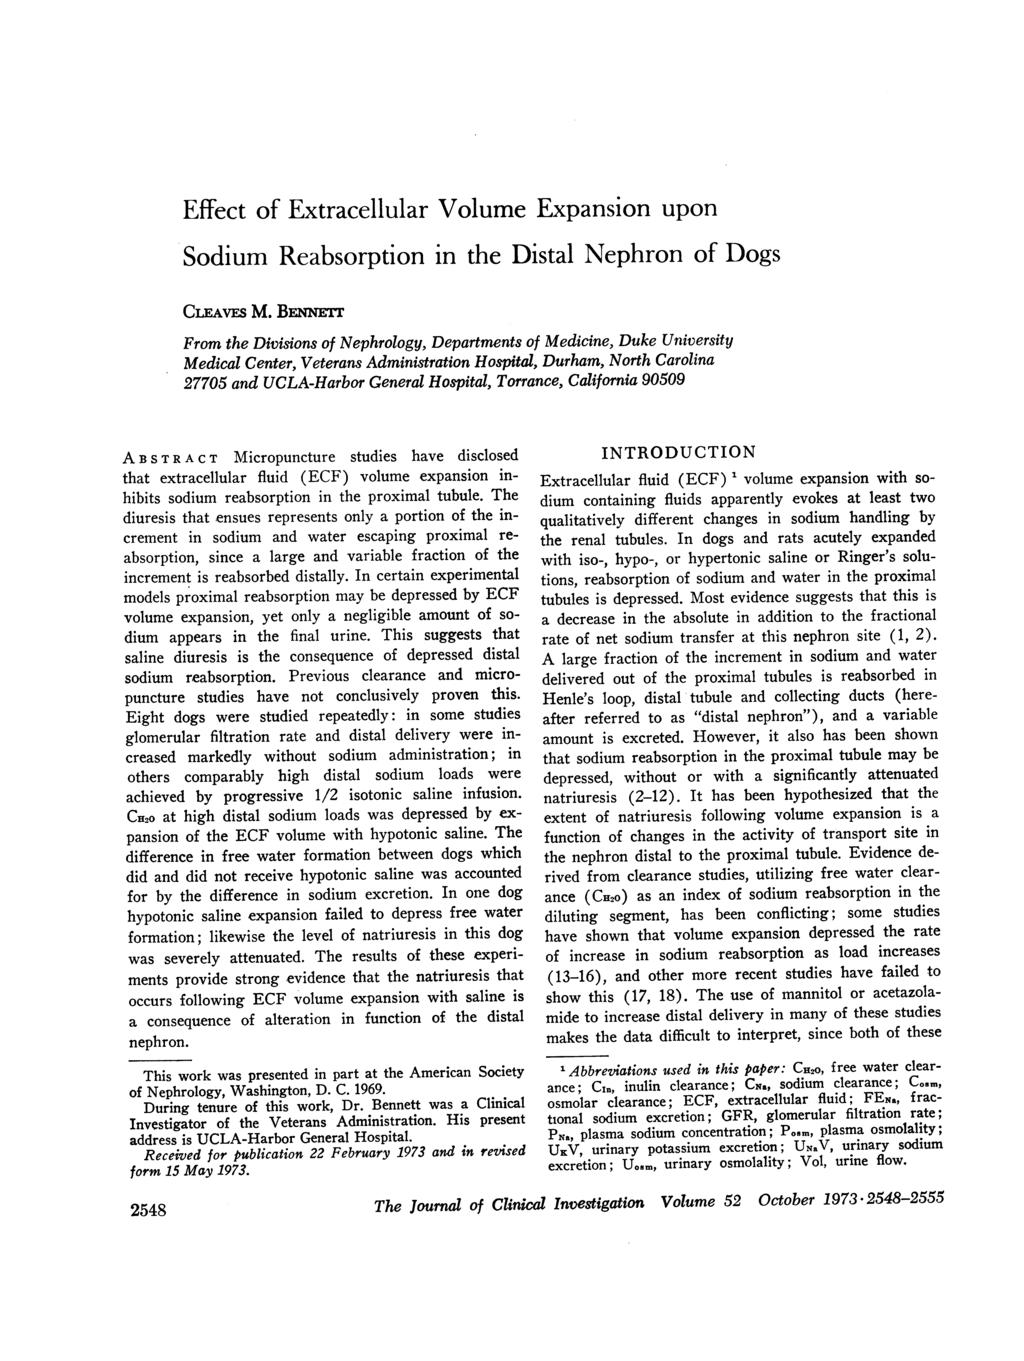 Effect of Extracellular Volume Expansion upon Sodium Reabsorption in the Distal Nephron of Dogs CiEAVES M.